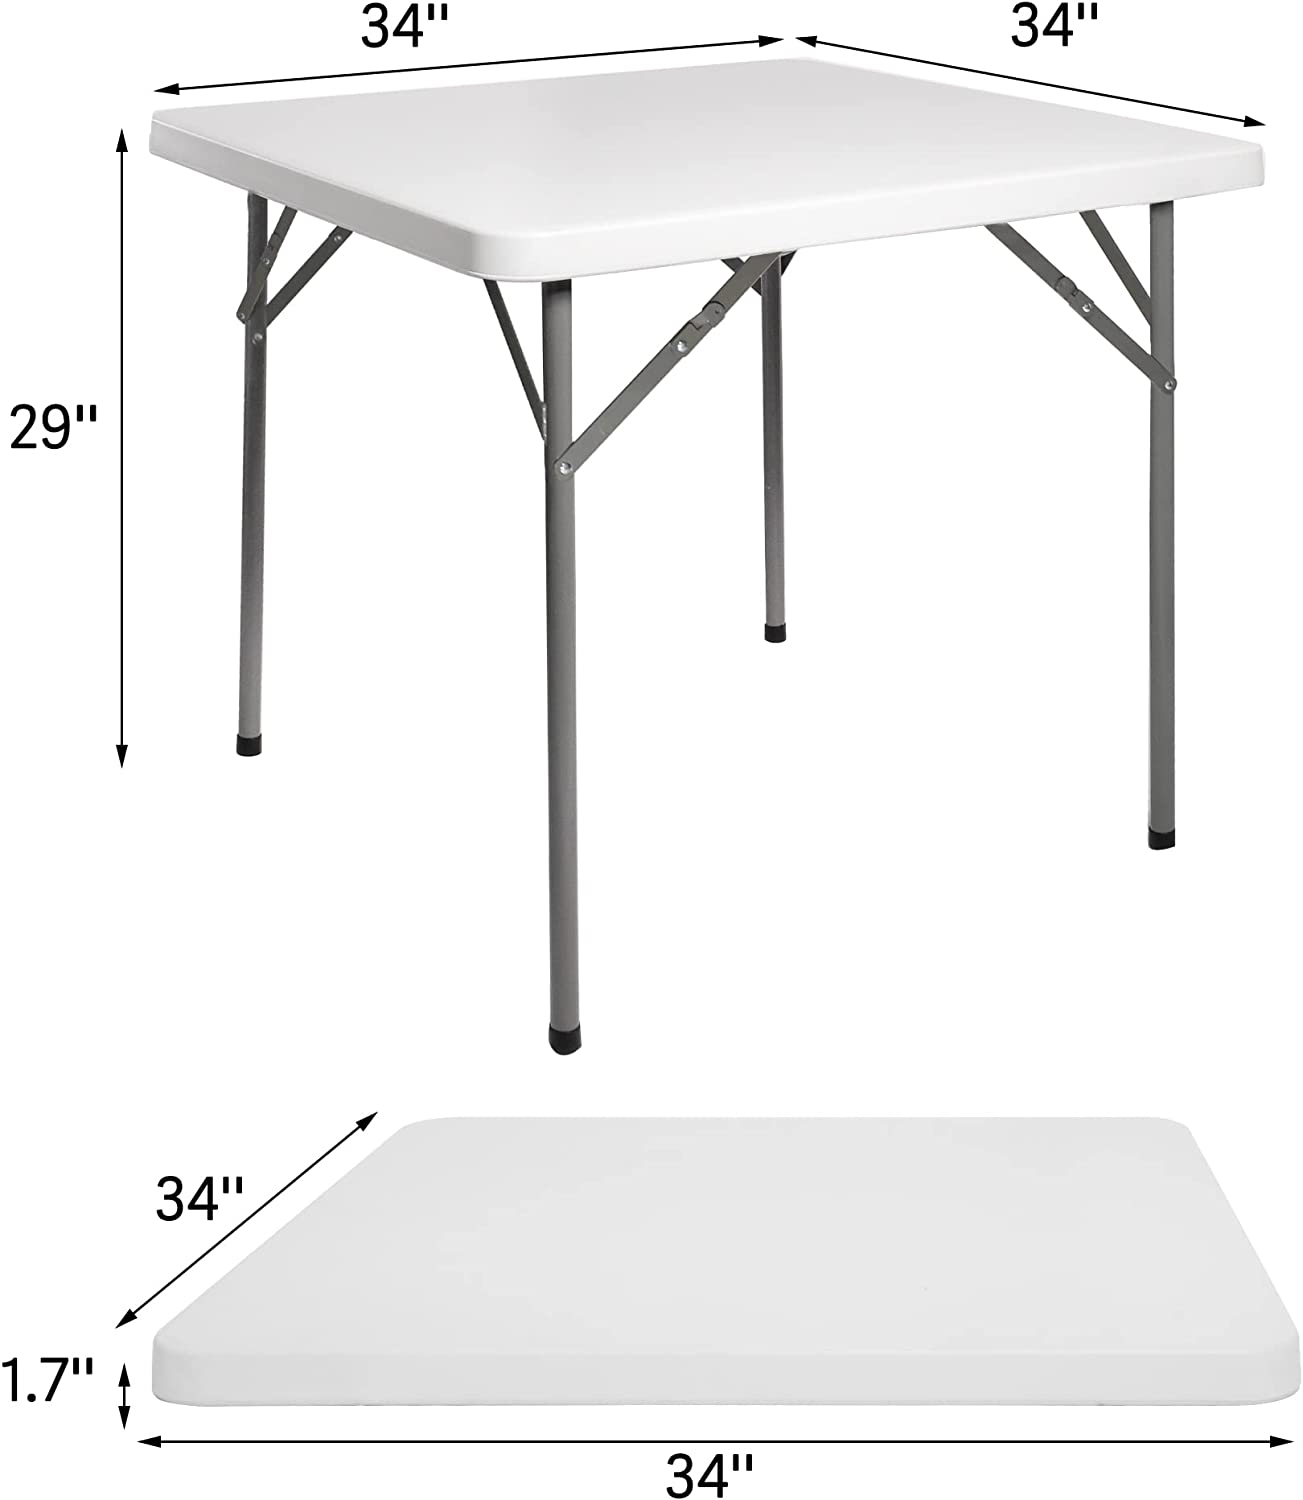 2.8 ft. Square Folding Card Table 34" Portable Patio Plastic Tables with Collapsible Legs